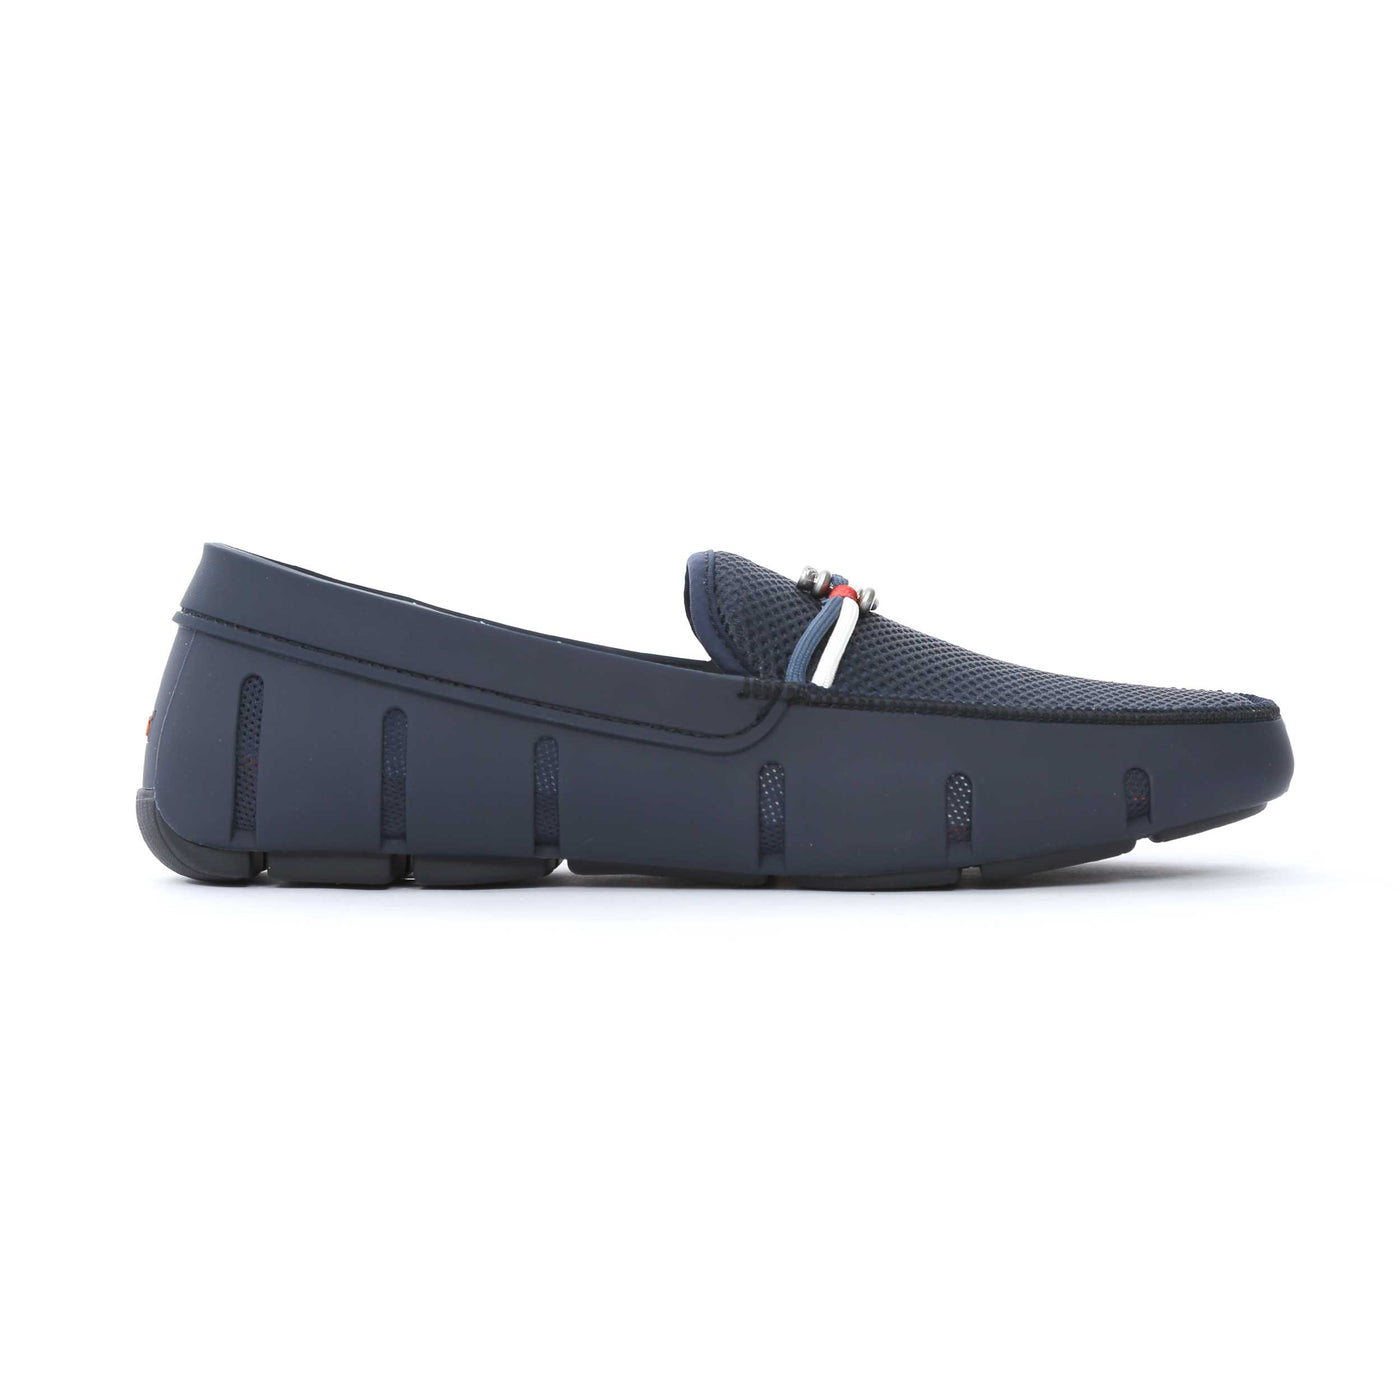 Swims Riva Loafer Shoe in Navy